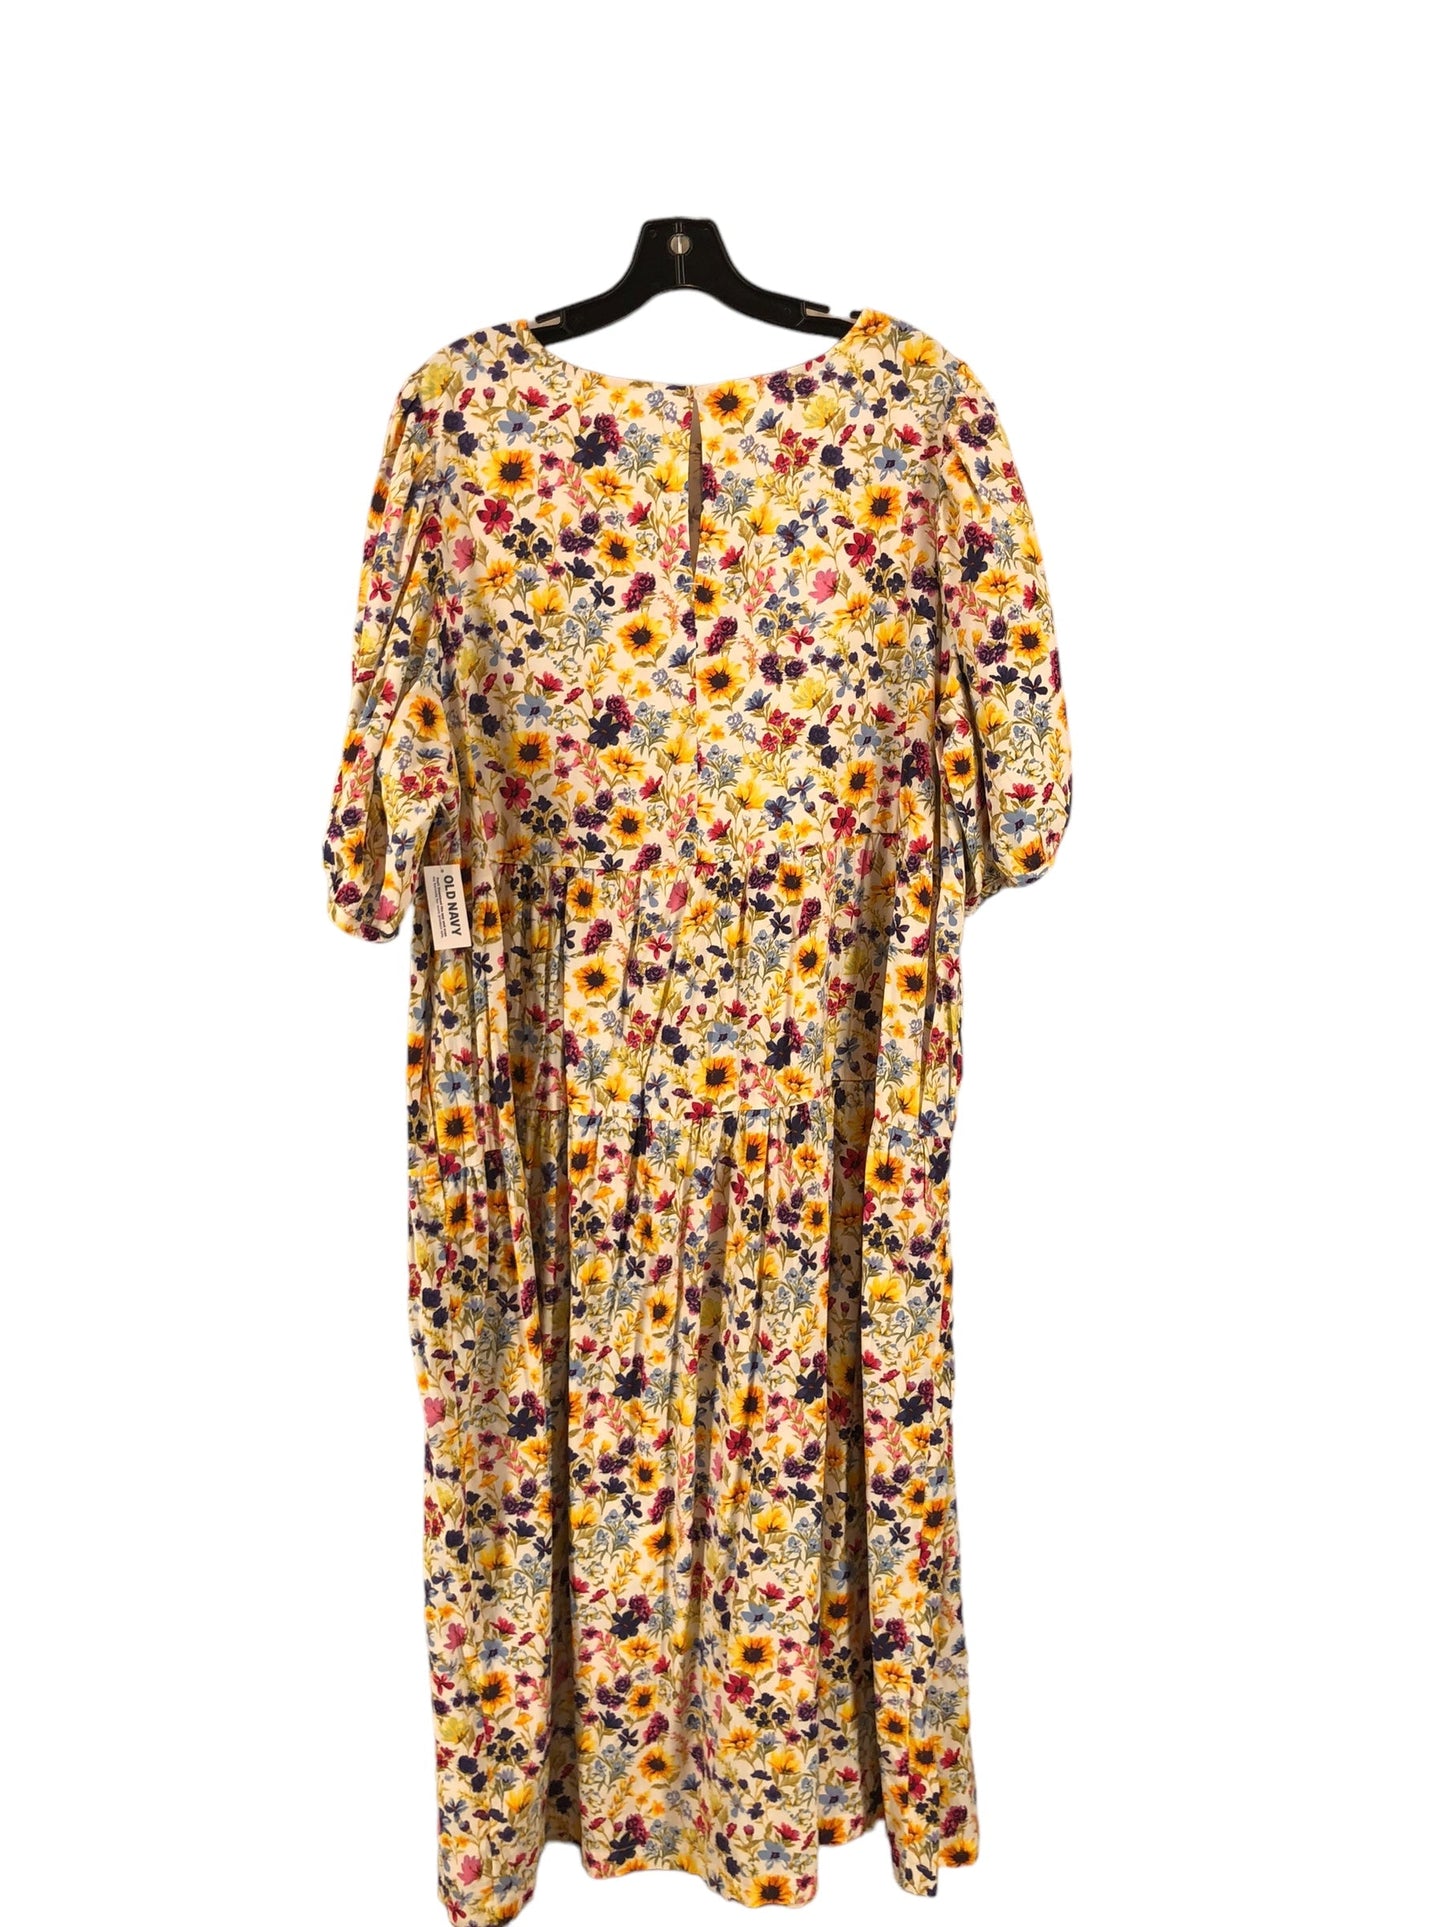 Floral Print Dress Casual Maxi Old Navy, Size 3x